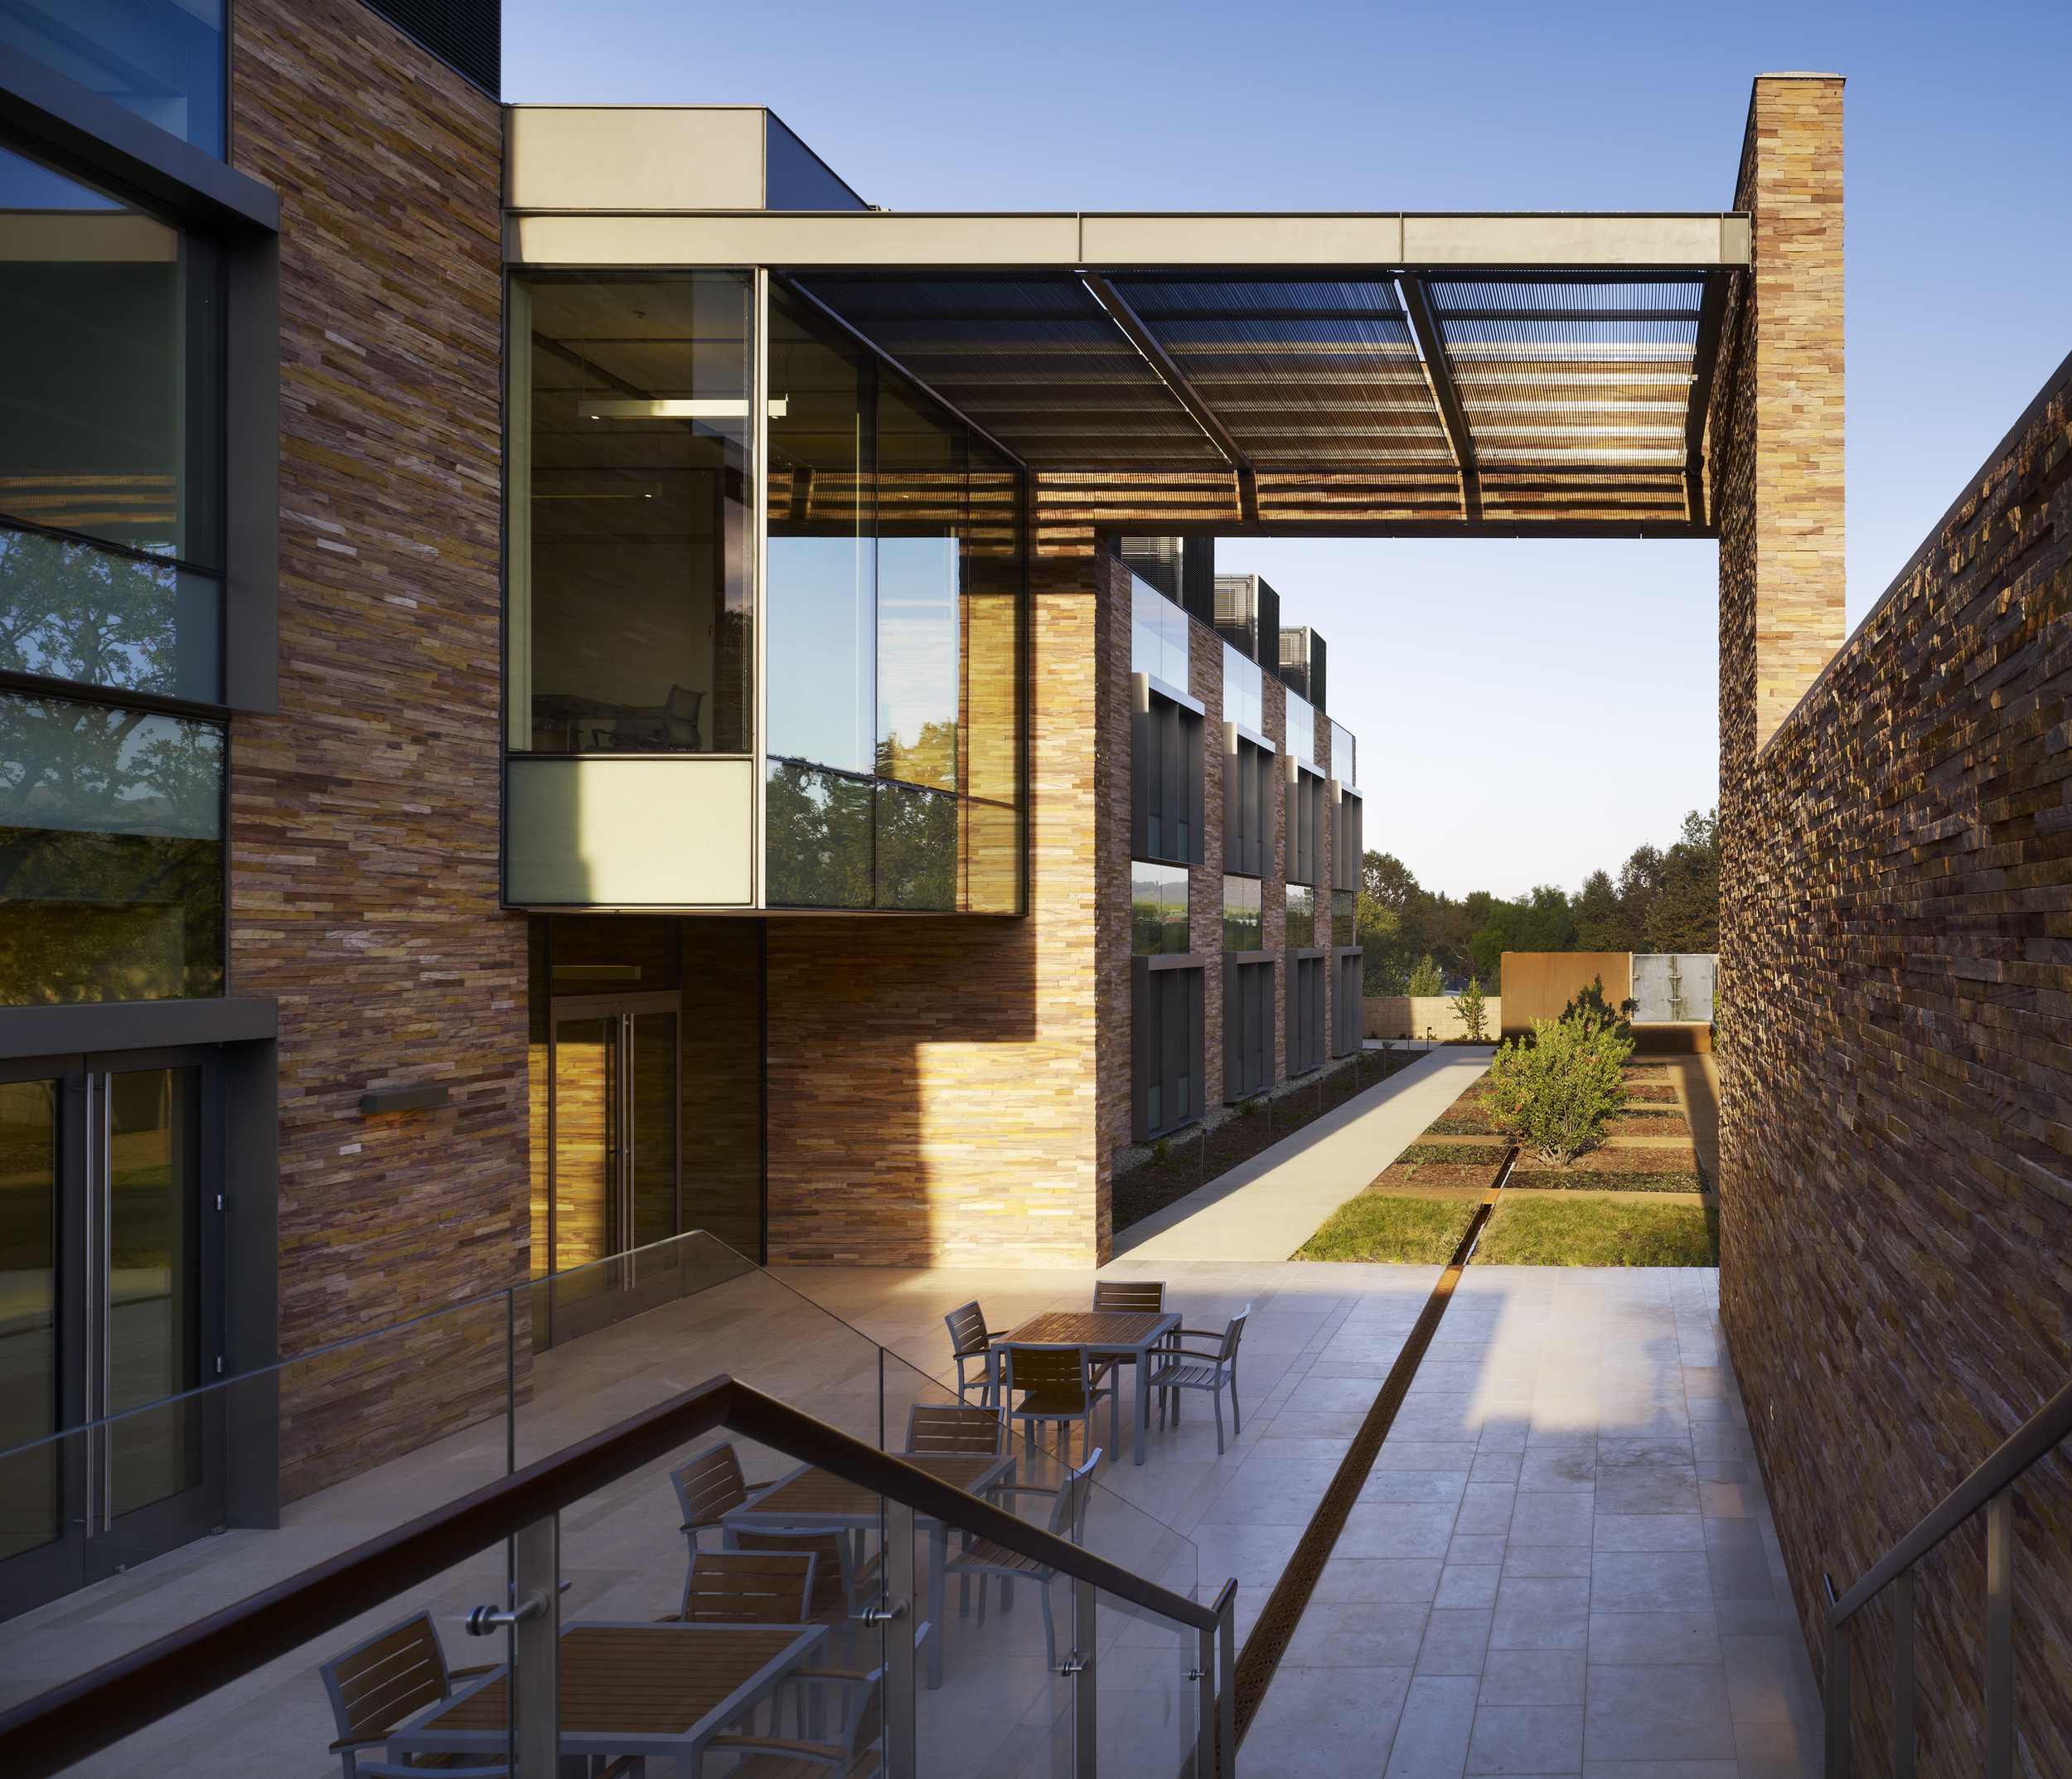   Watch Video      Conrad Hilton Foundation  ZGF Architects  Agoura Hills, CA      Return to Projects  